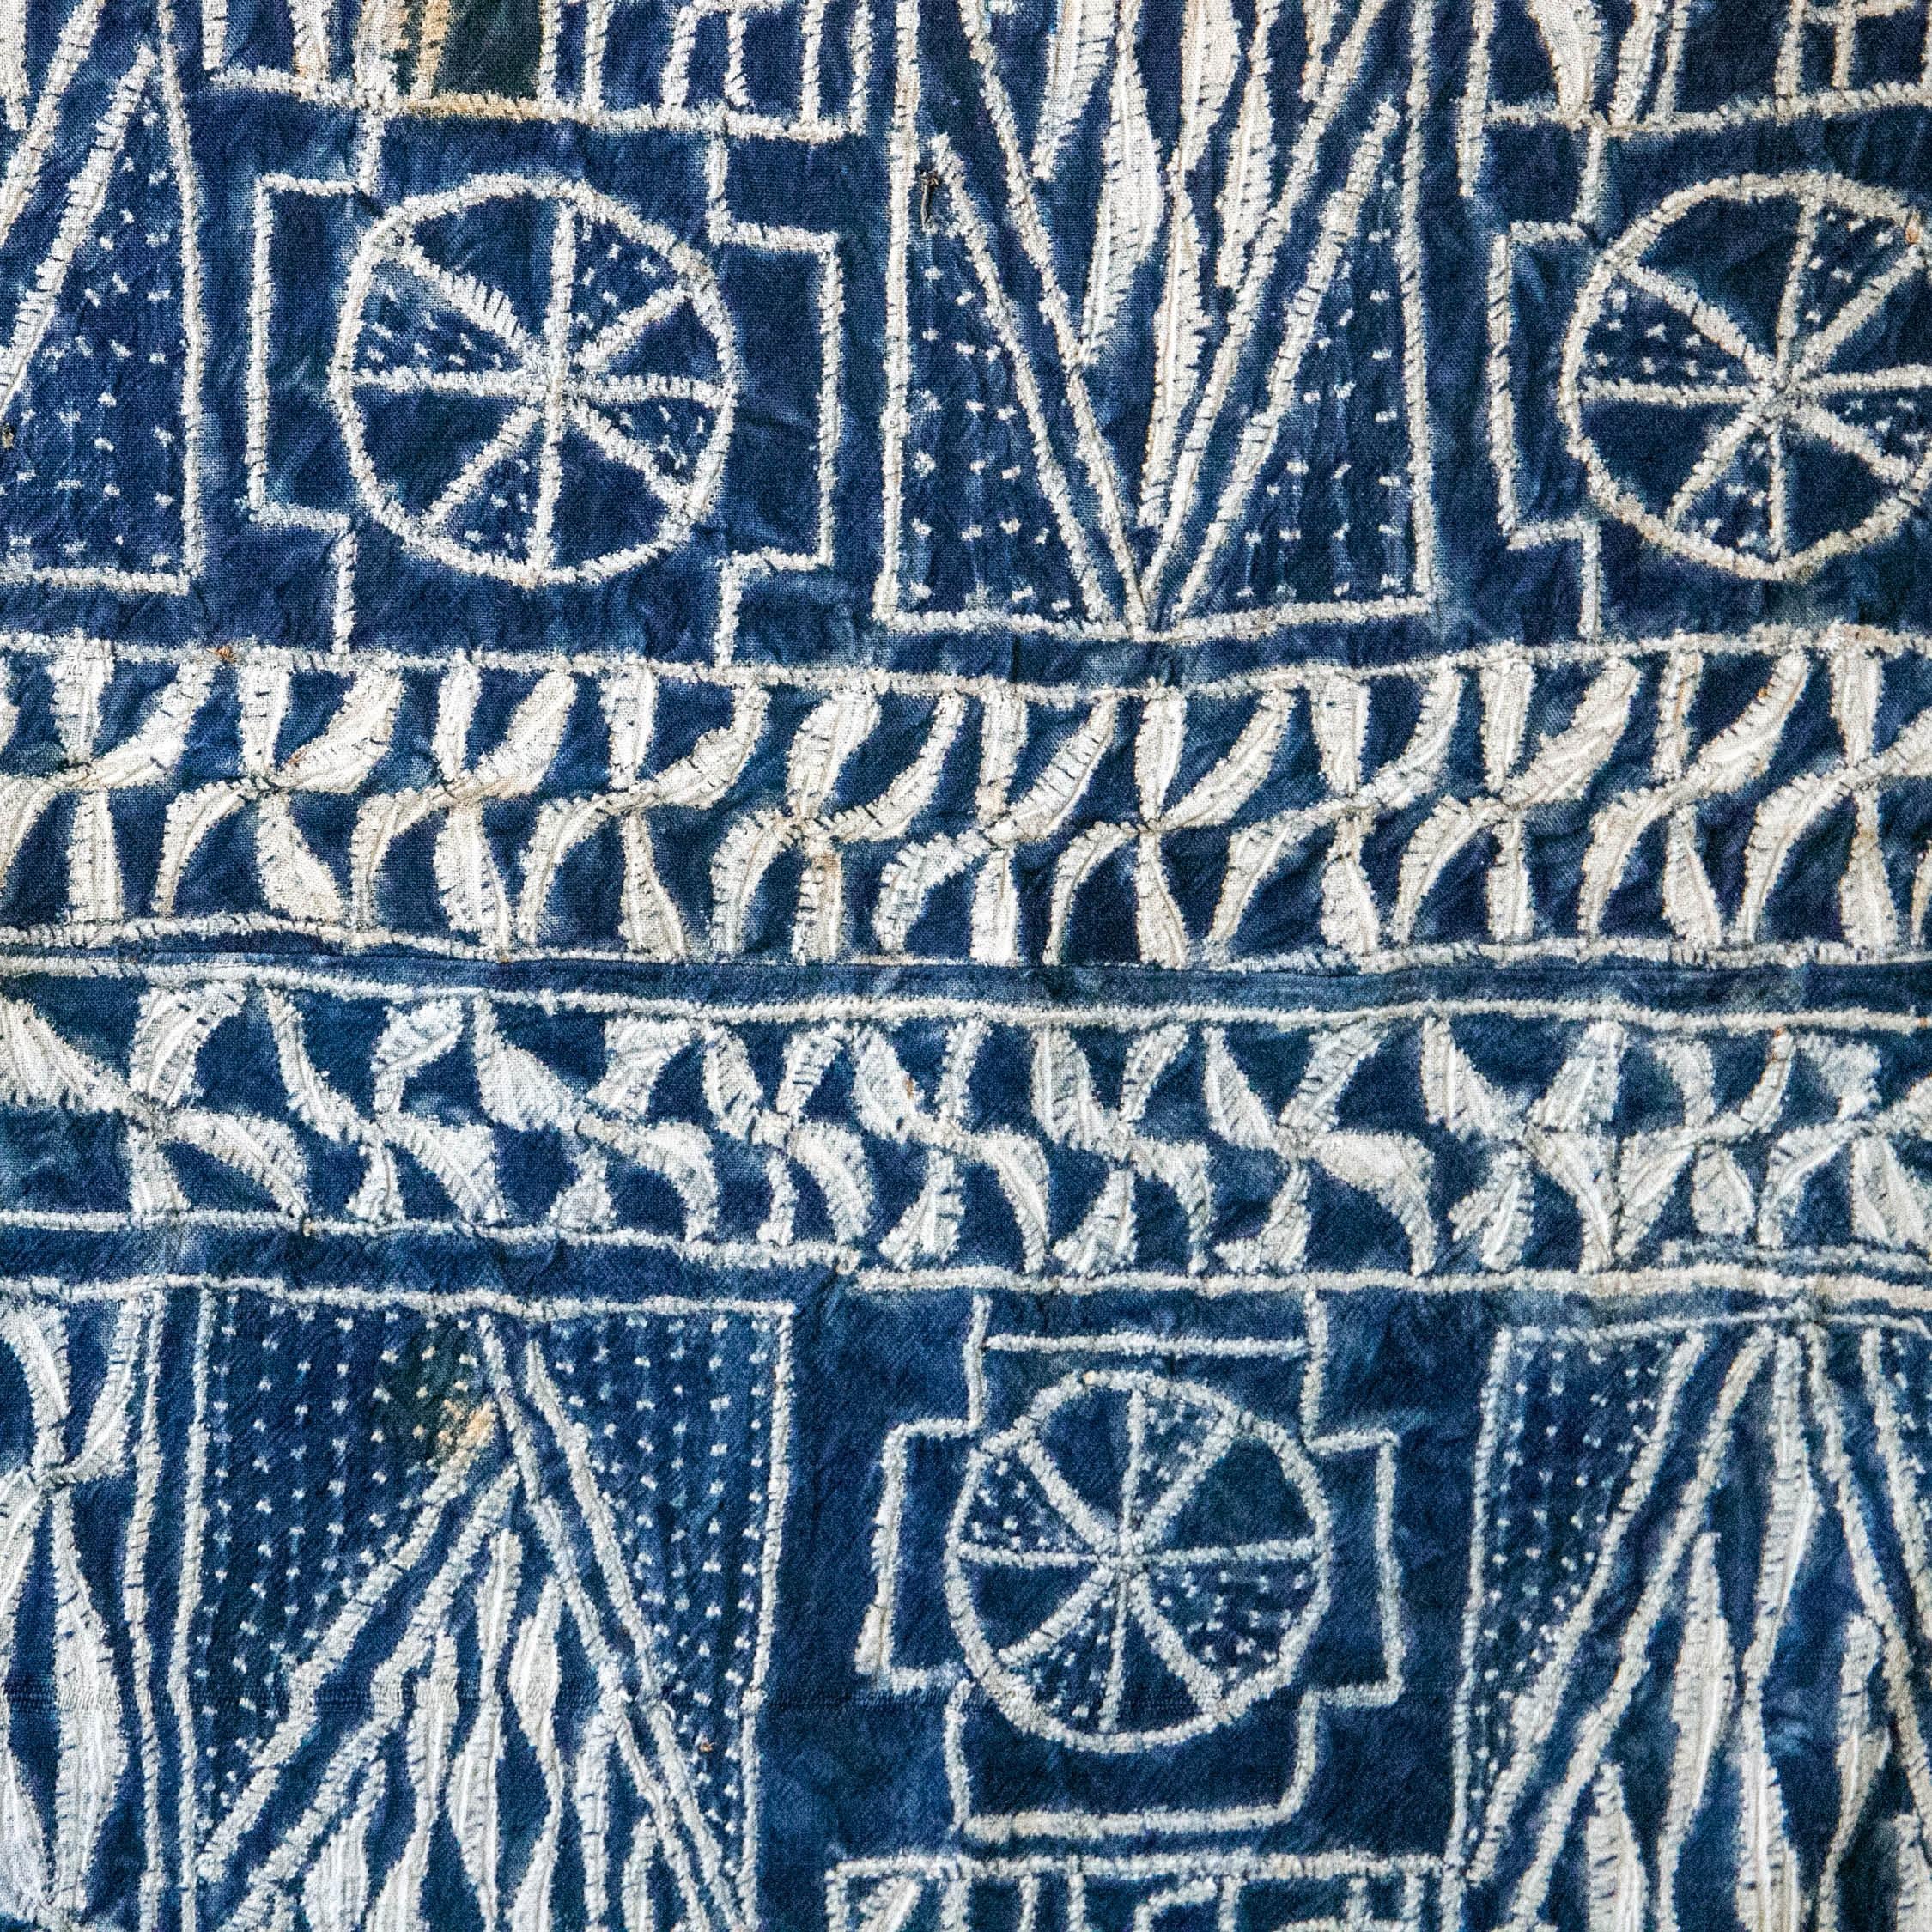 Hand-Crafted Large Vintage ‘Ndop’ Indigo Cloth or Textile Mid 20th C or Earlier   For Sale